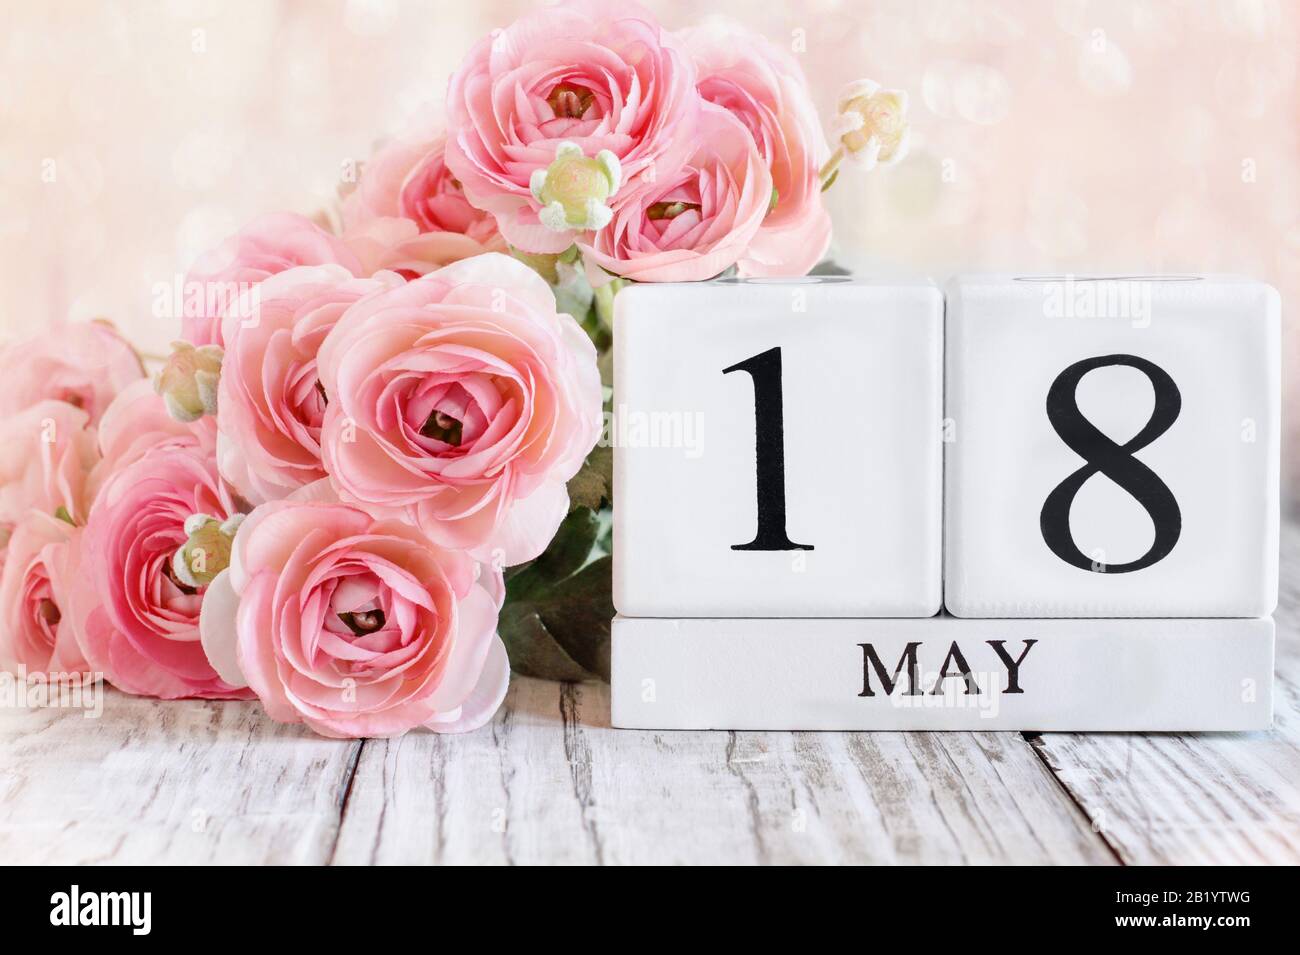 White wood calendar blocks with the date May 18th and pink ranunculus flowers over a wooden table. Selective focus with blurred background. Stock Photo